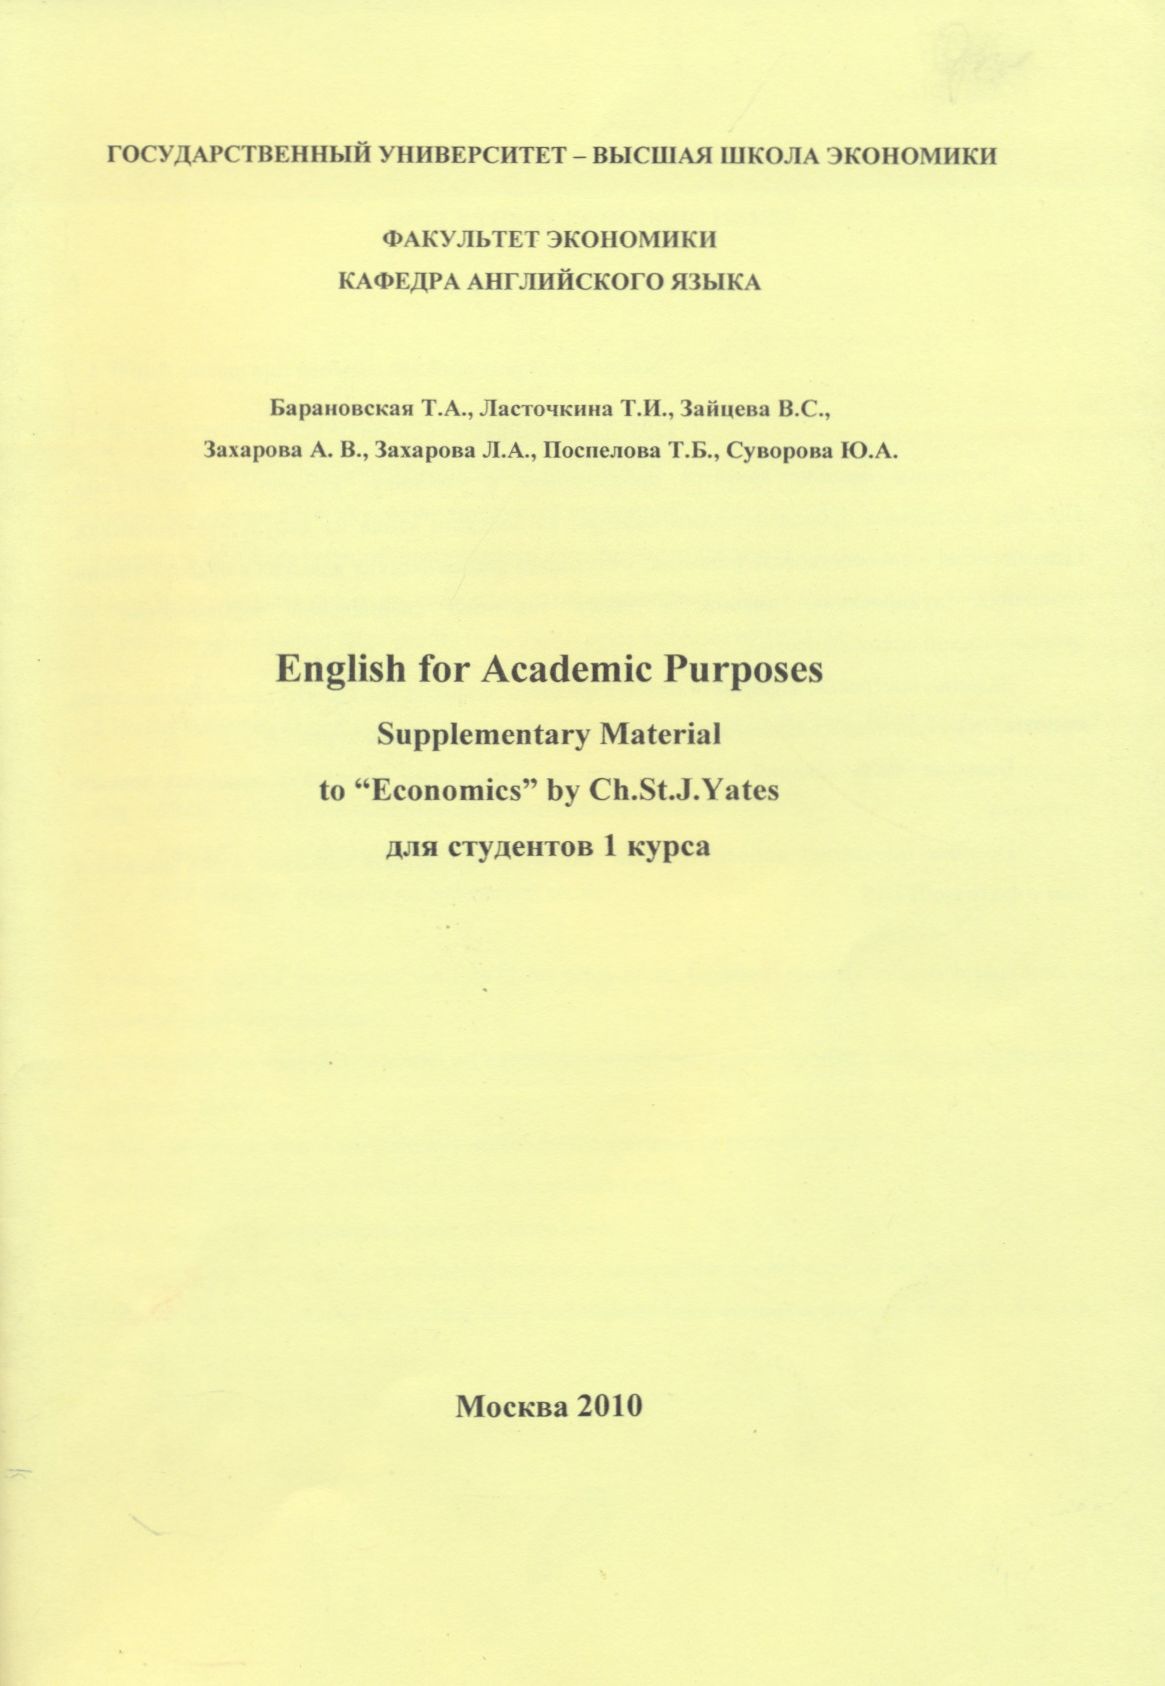 English for Academic Purposes. Supplementary material to “Economics” by Ch. St. J. Yates